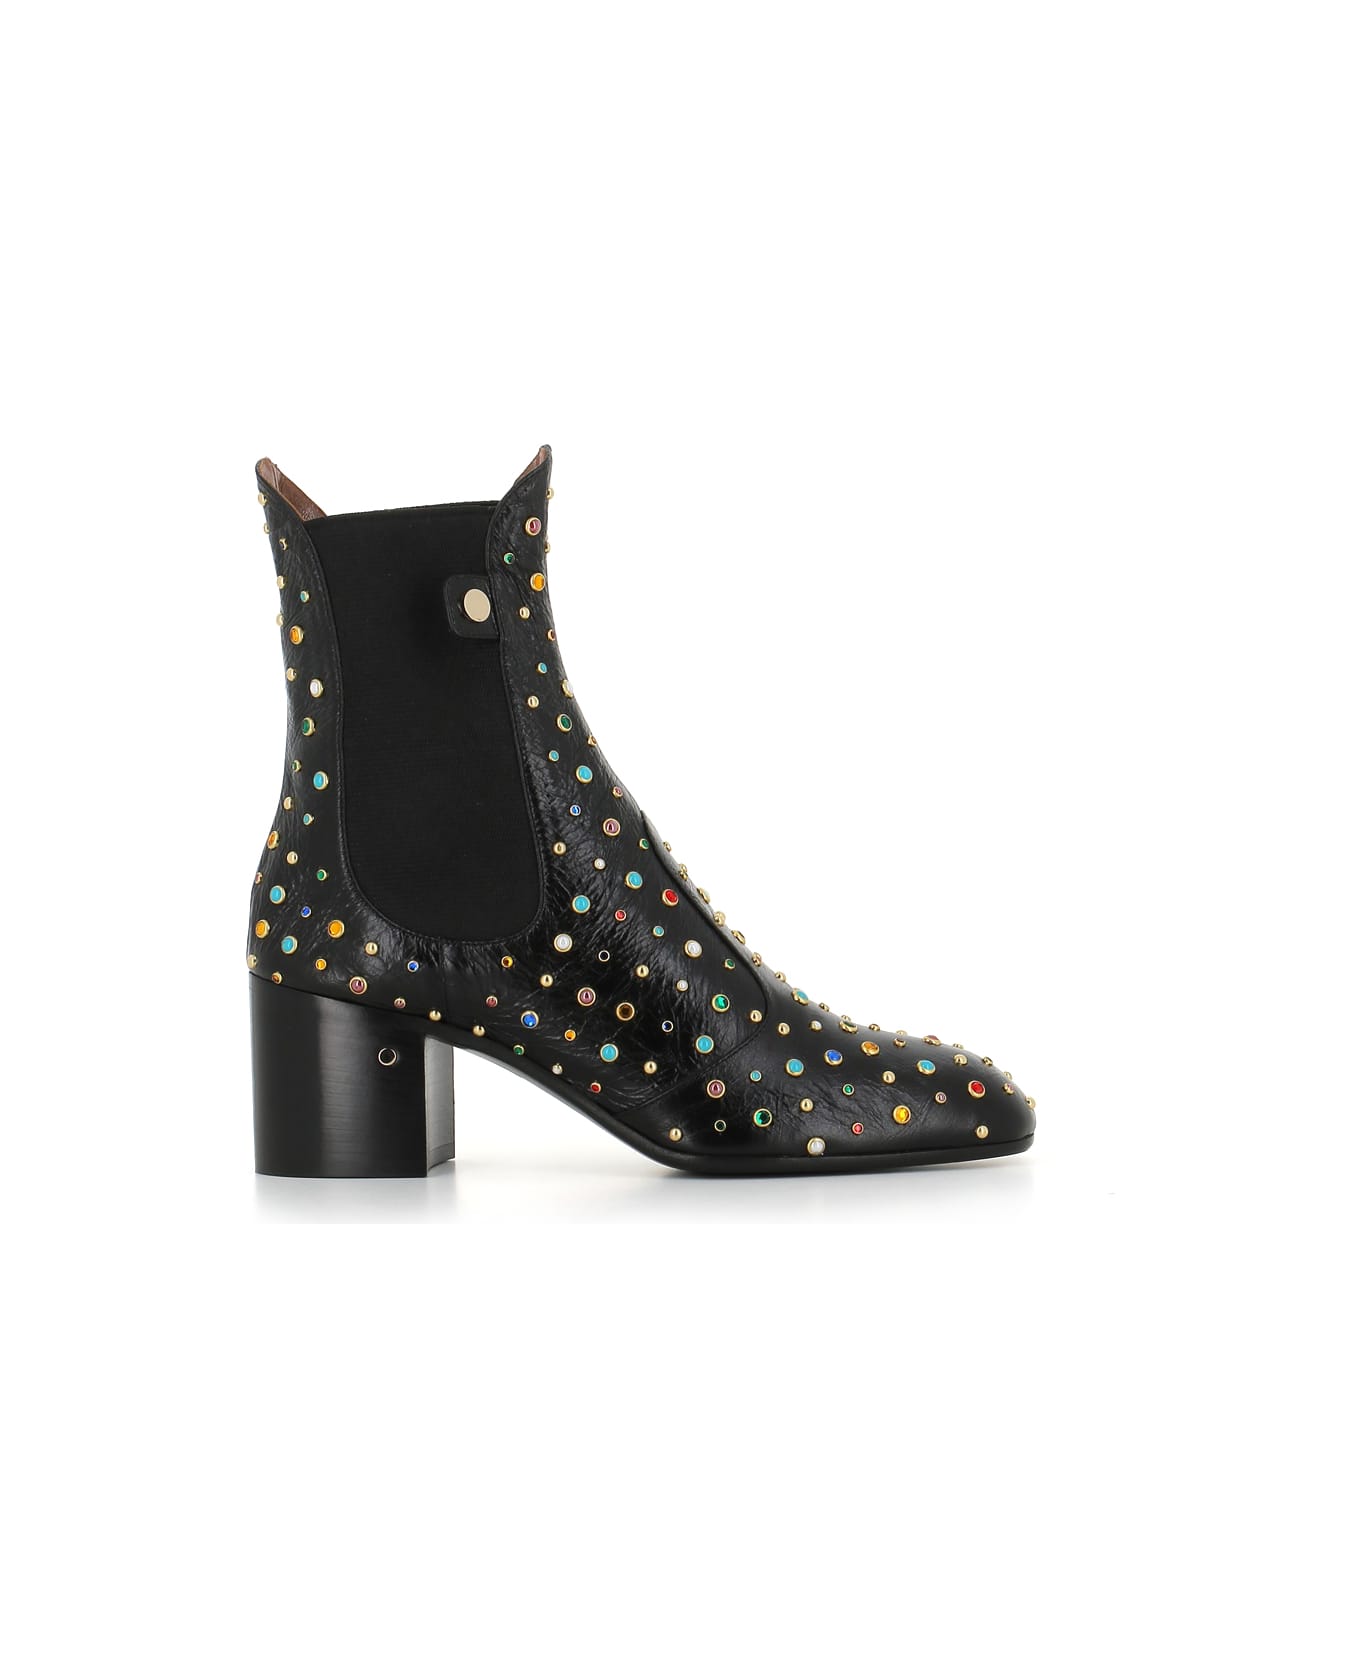 Laurence Dacade Boot Angie Multicolor Studs - Black